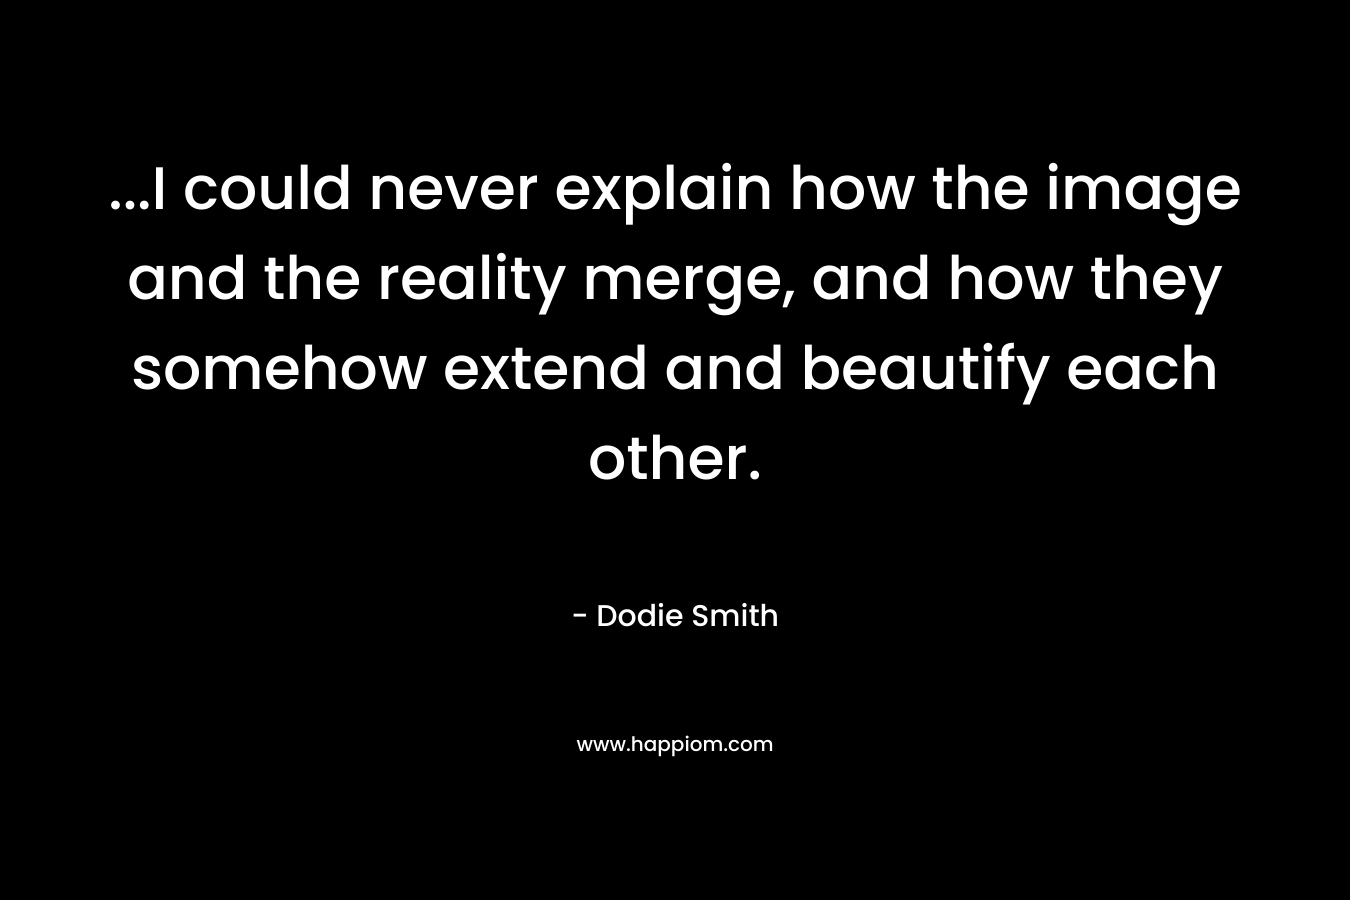 …I could never explain how the image and the reality merge, and how they somehow extend and beautify each other. – Dodie Smith